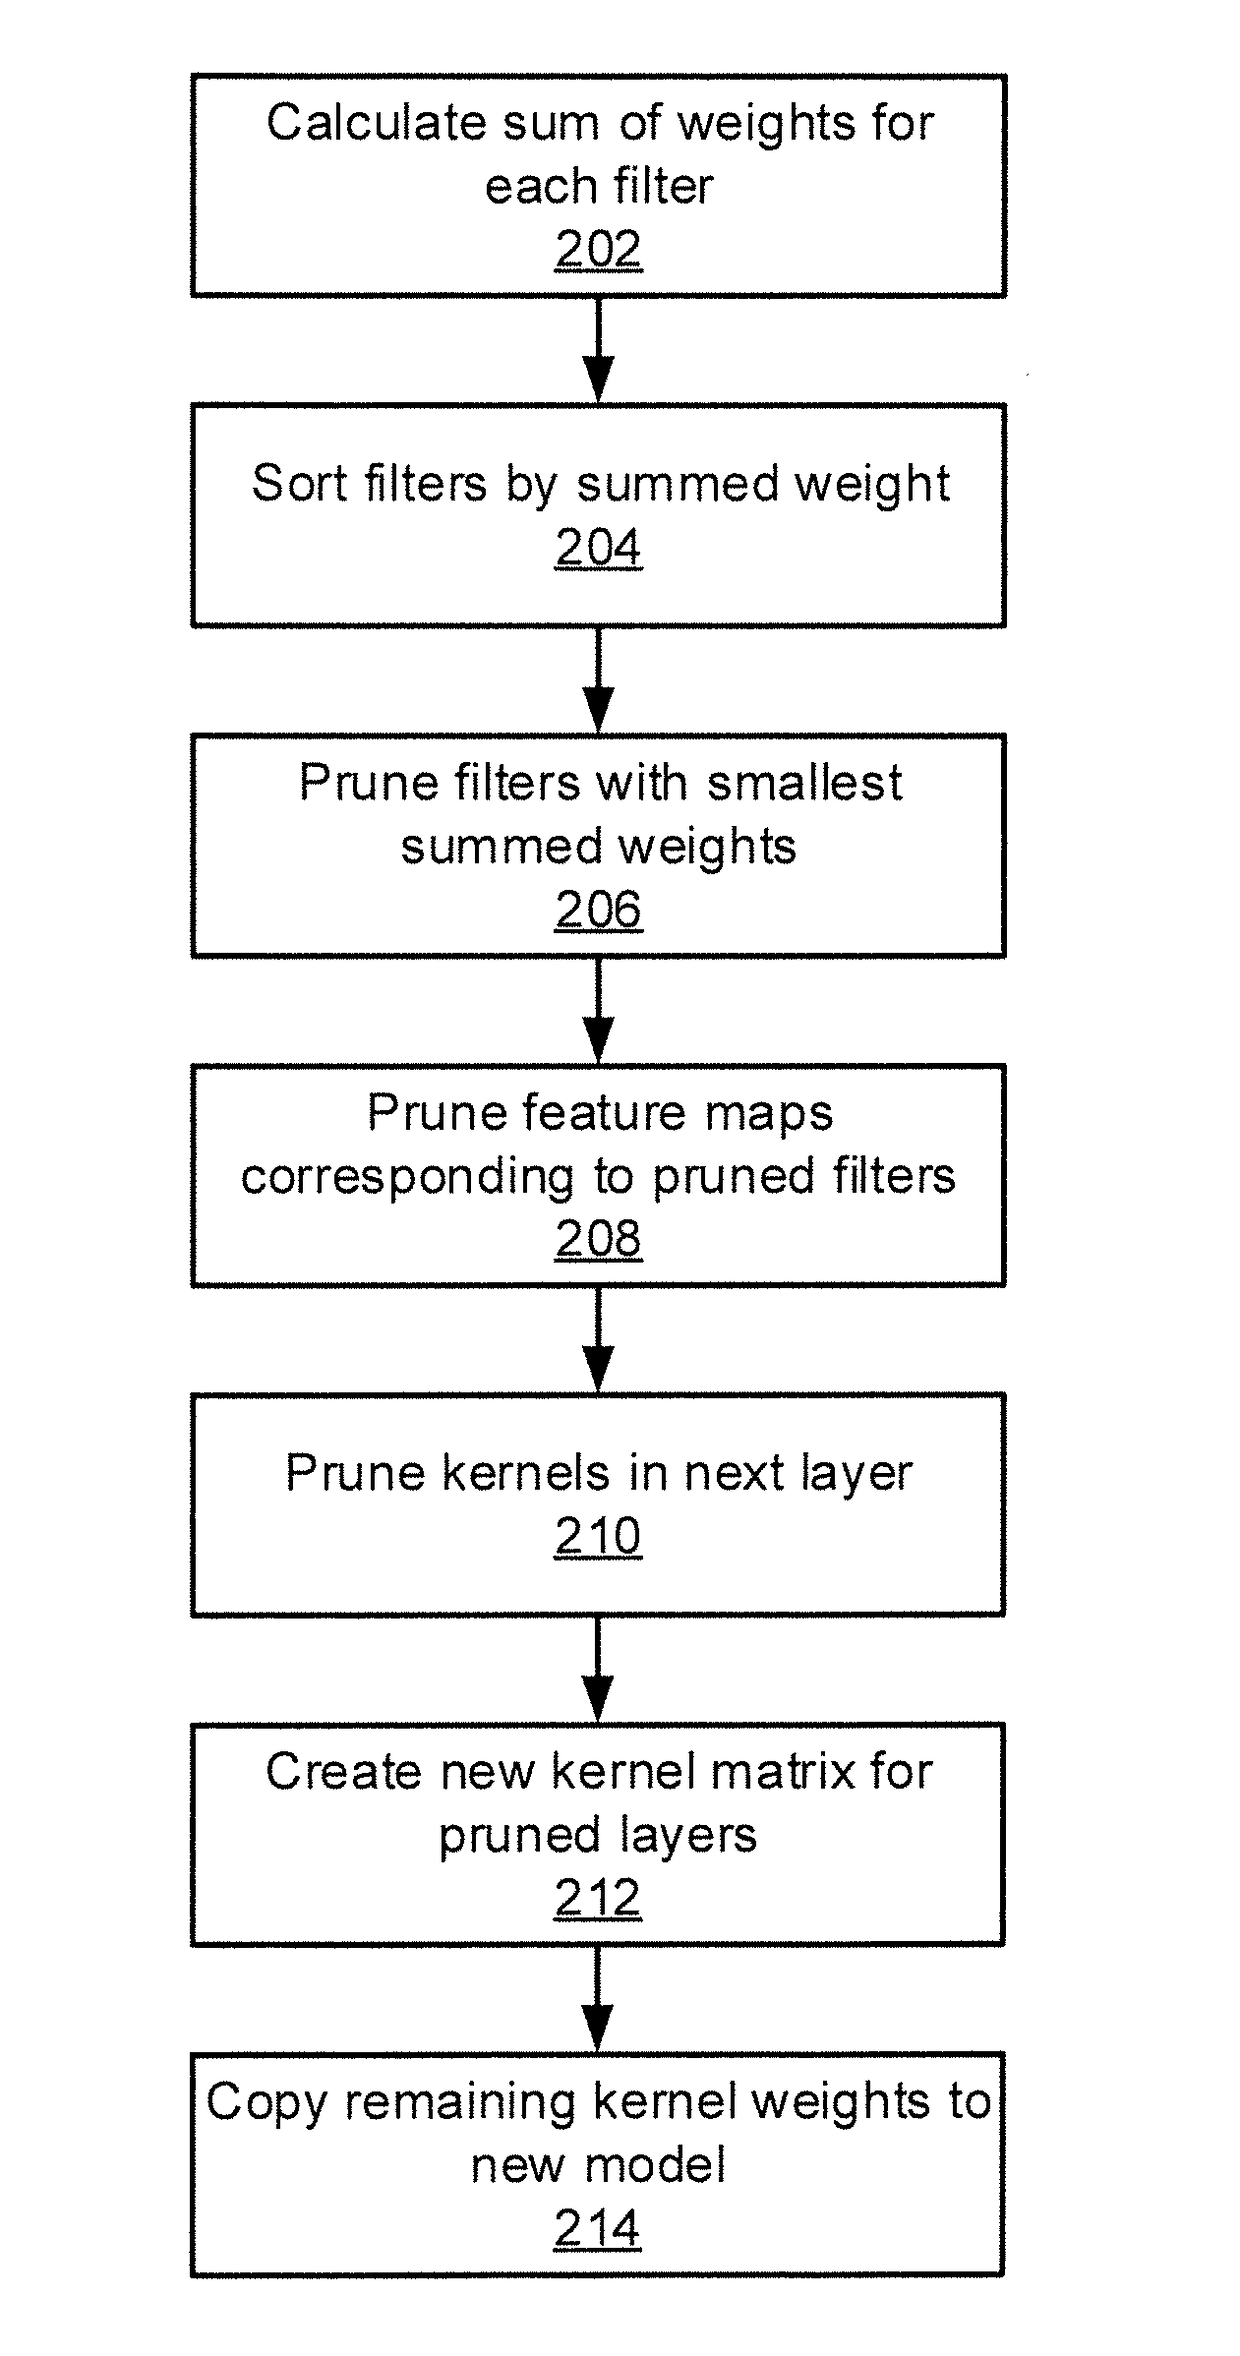 Passive pruning of filters in a convolutional neural network